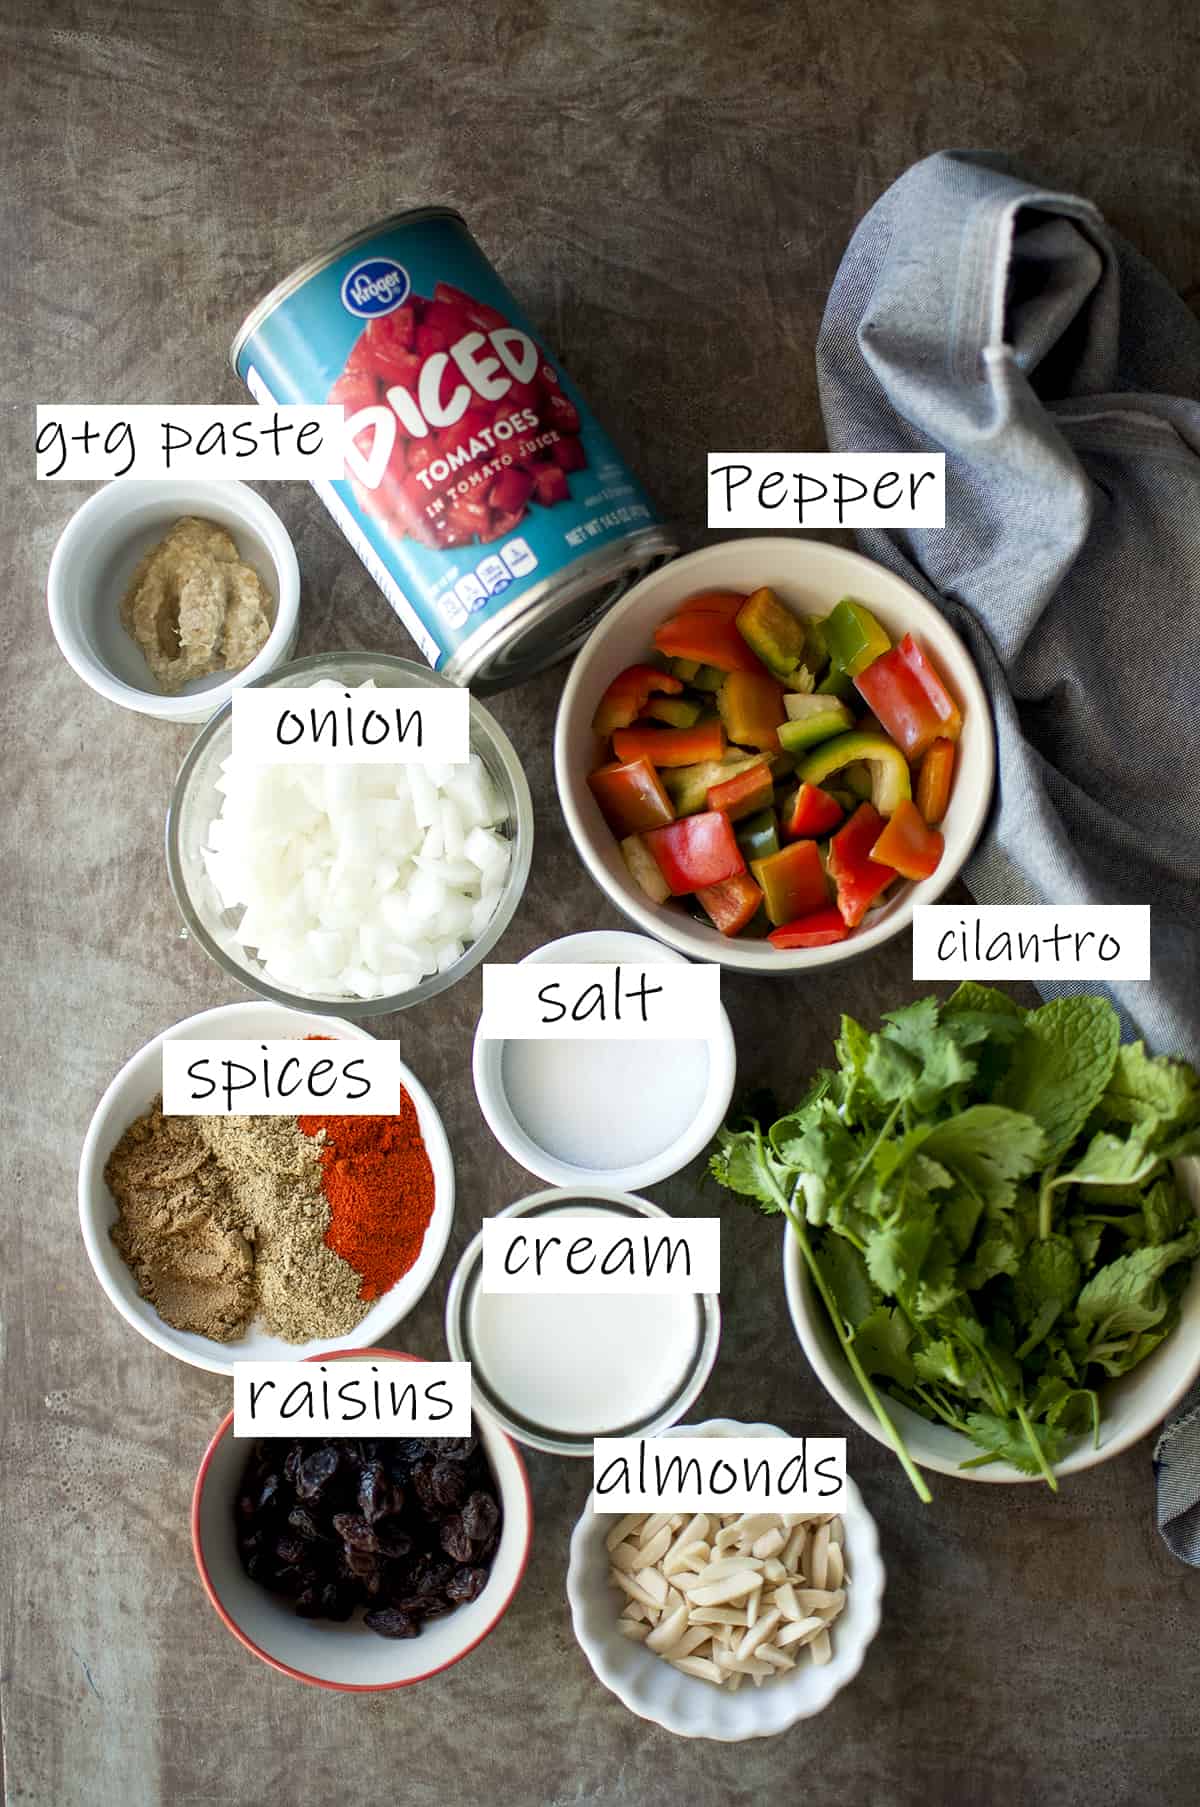 Ingredients needed to make the masala / curry sauce for the dish